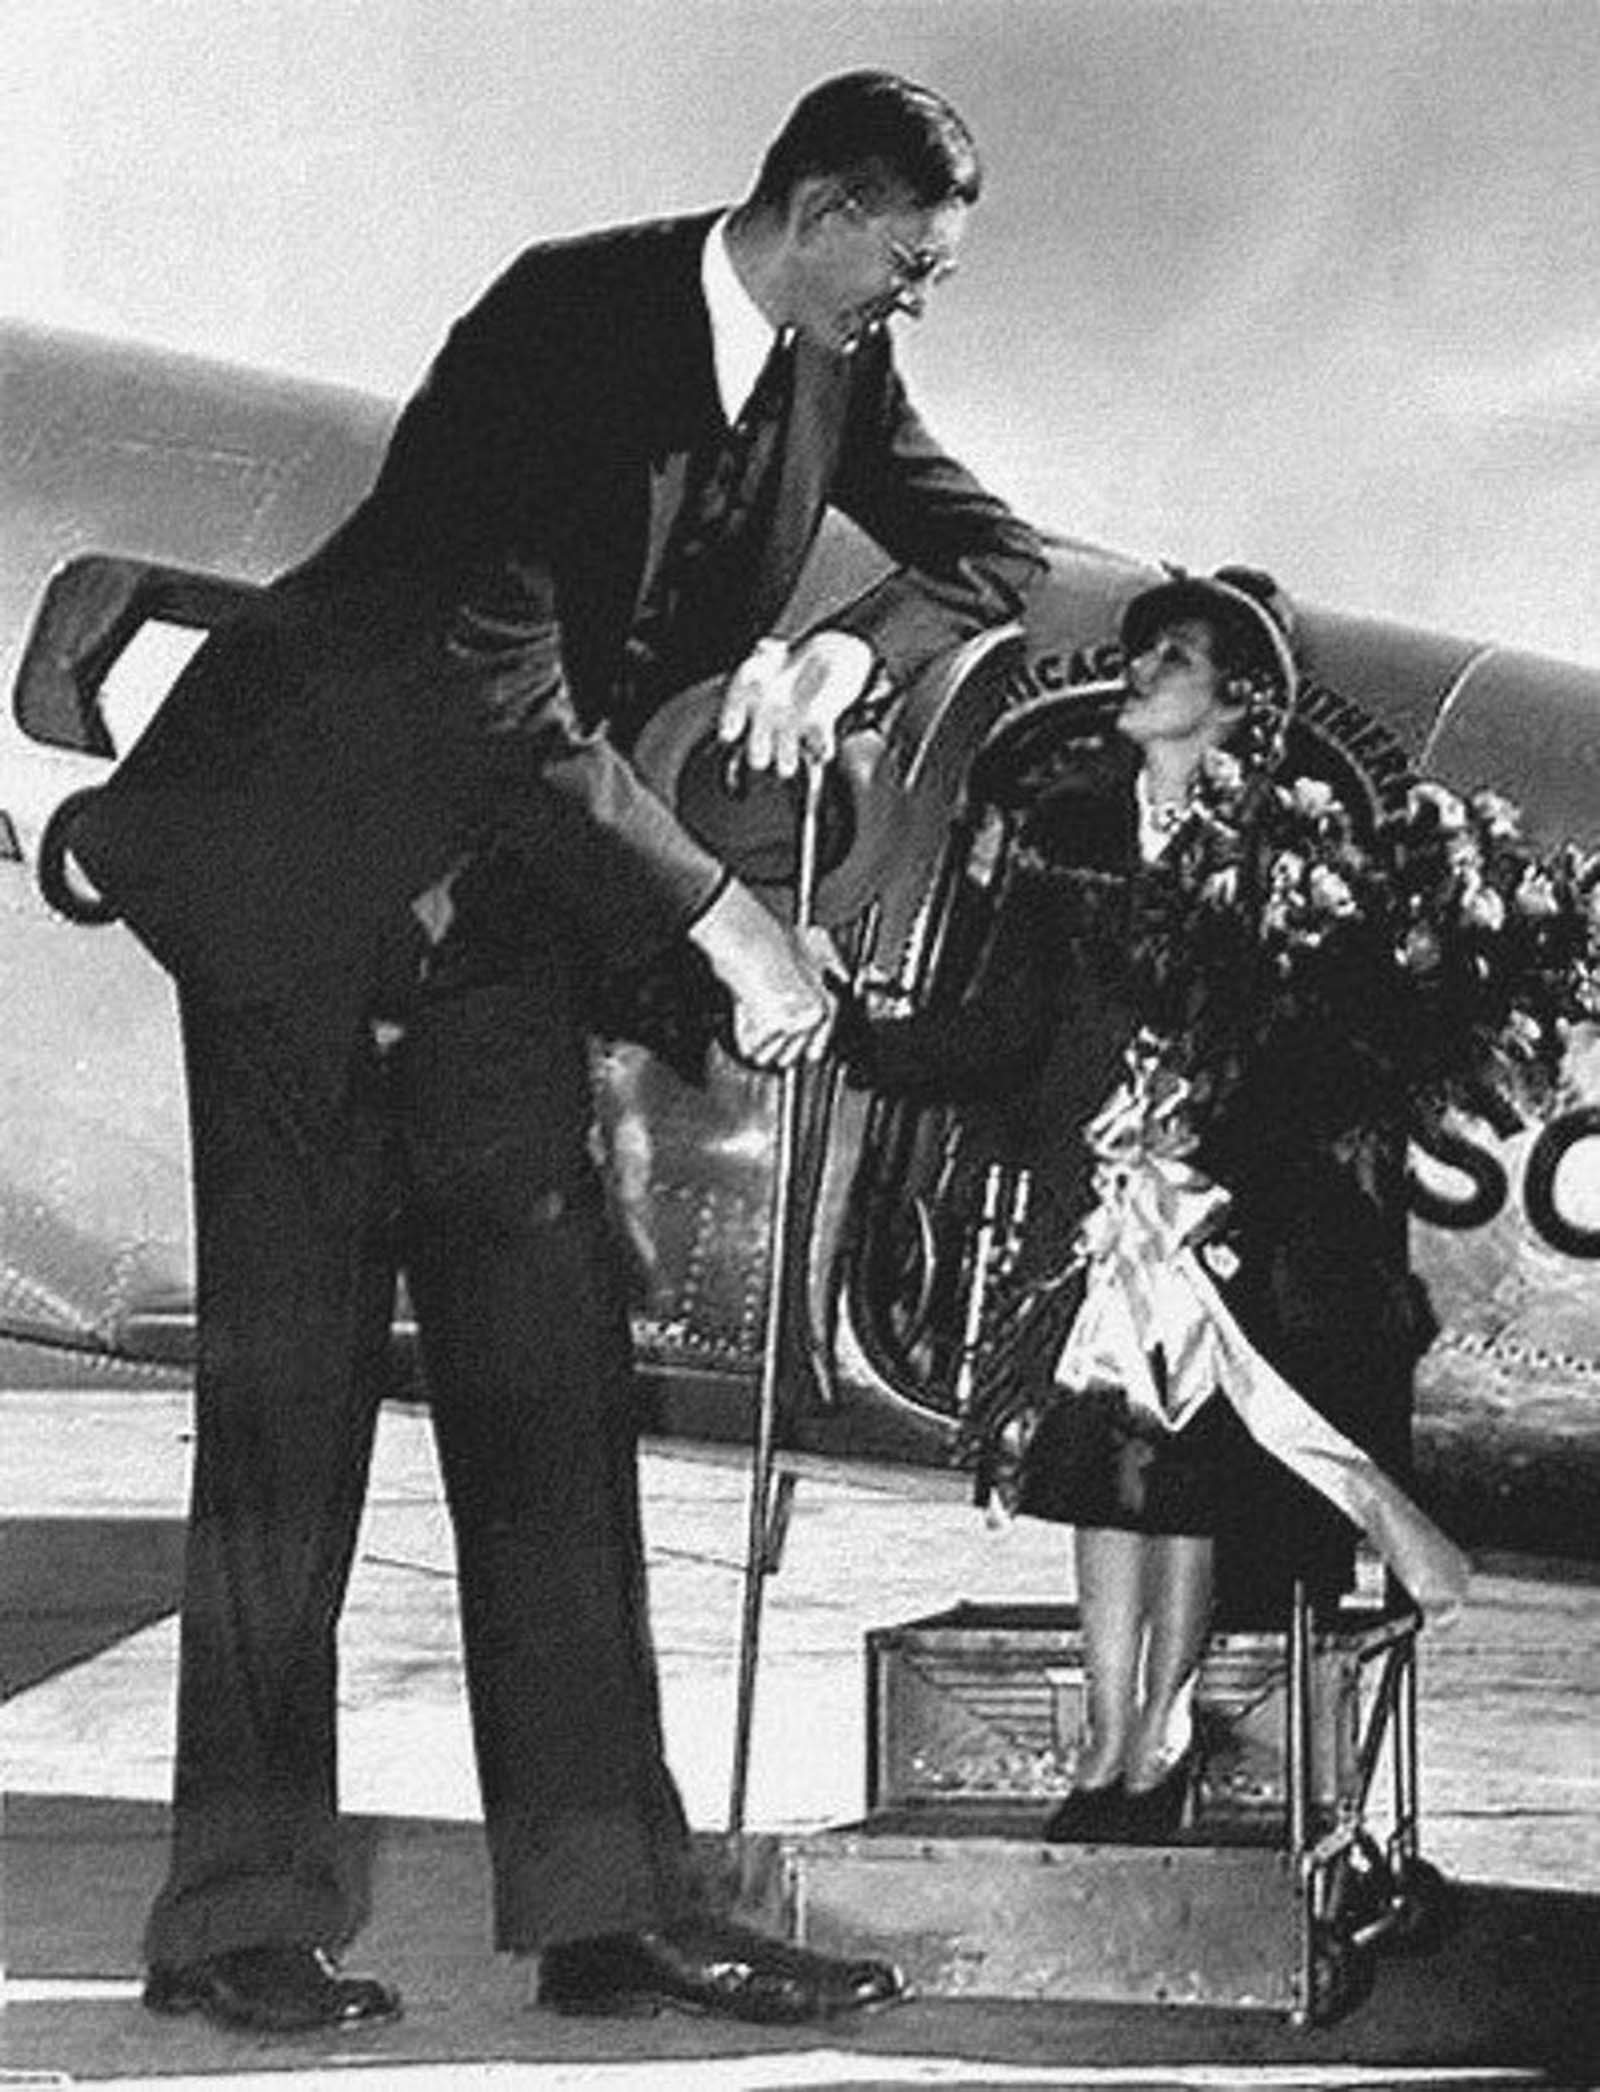 Robert greets Movie star Mary Pickford at the St. Louis airport.